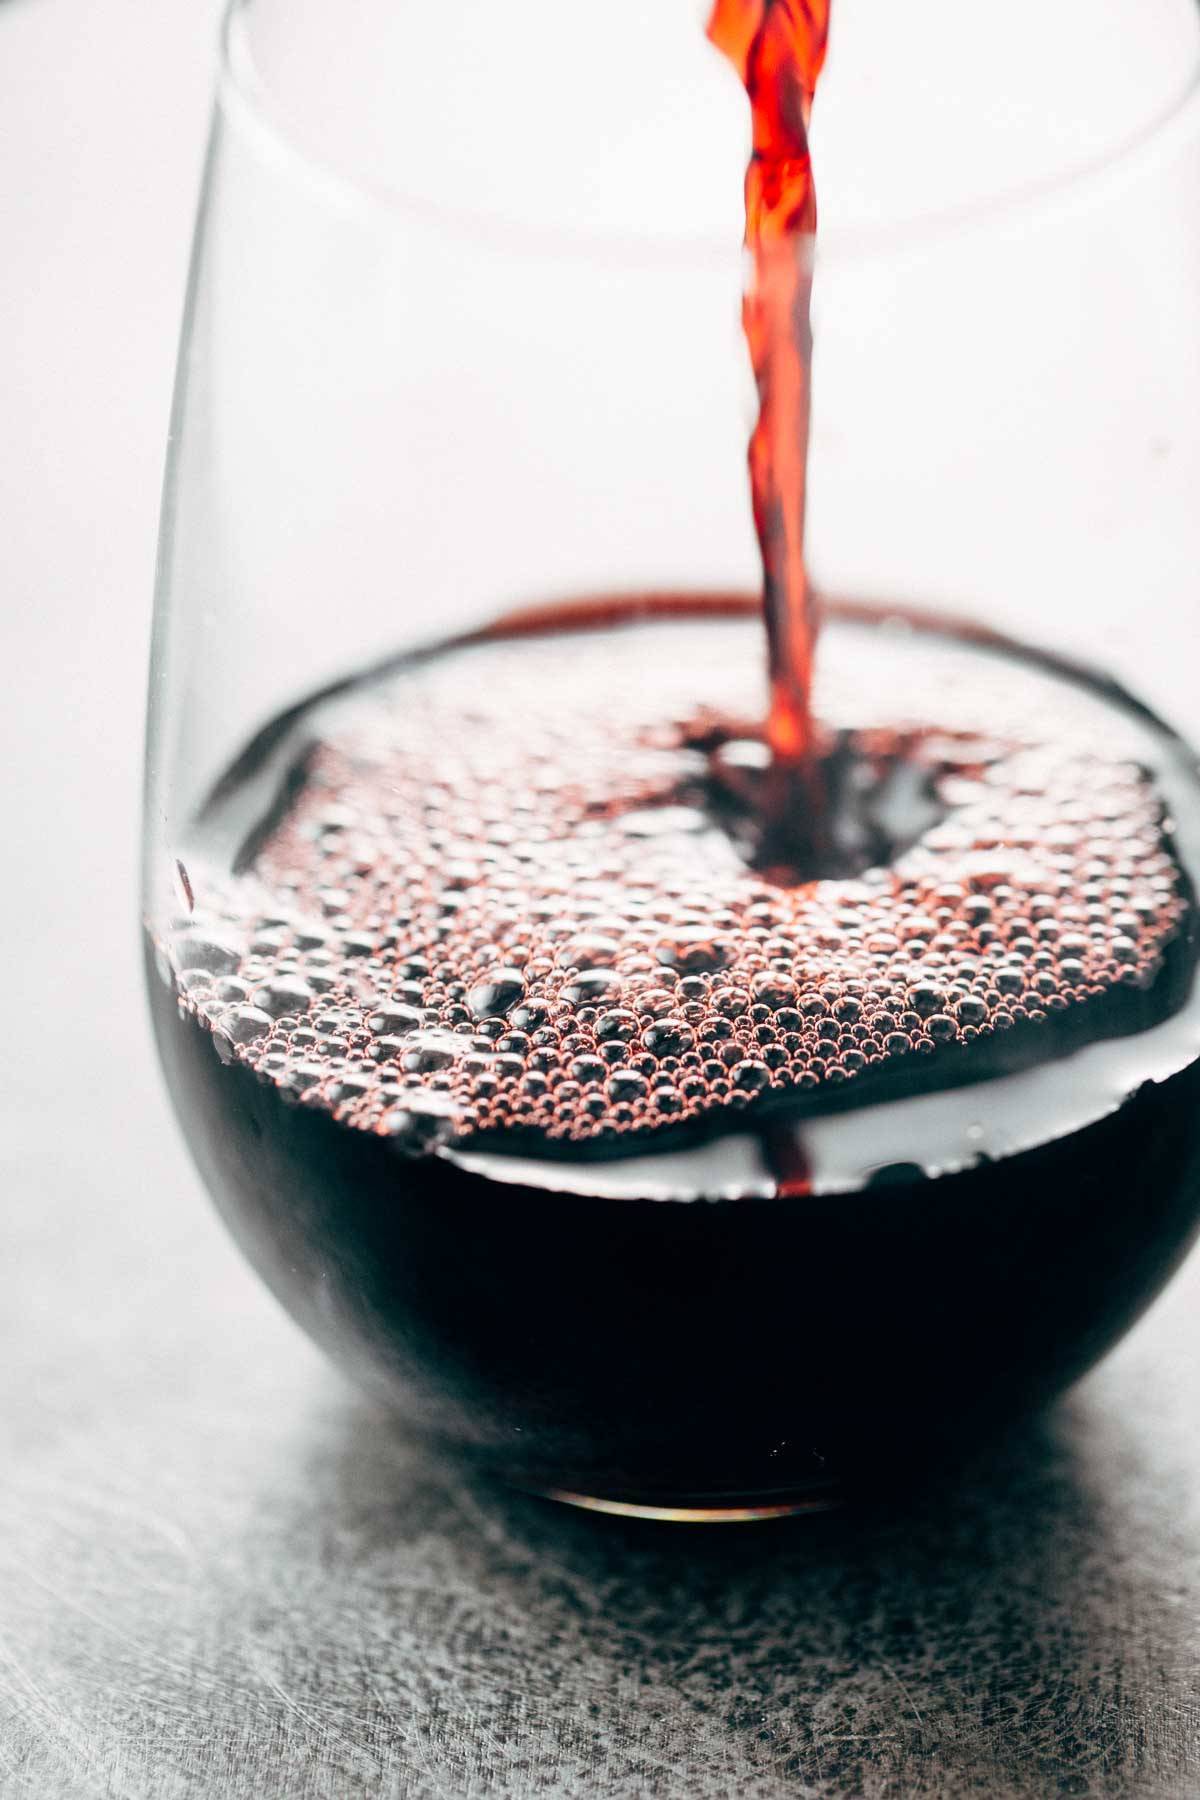 Red wine in a glass.